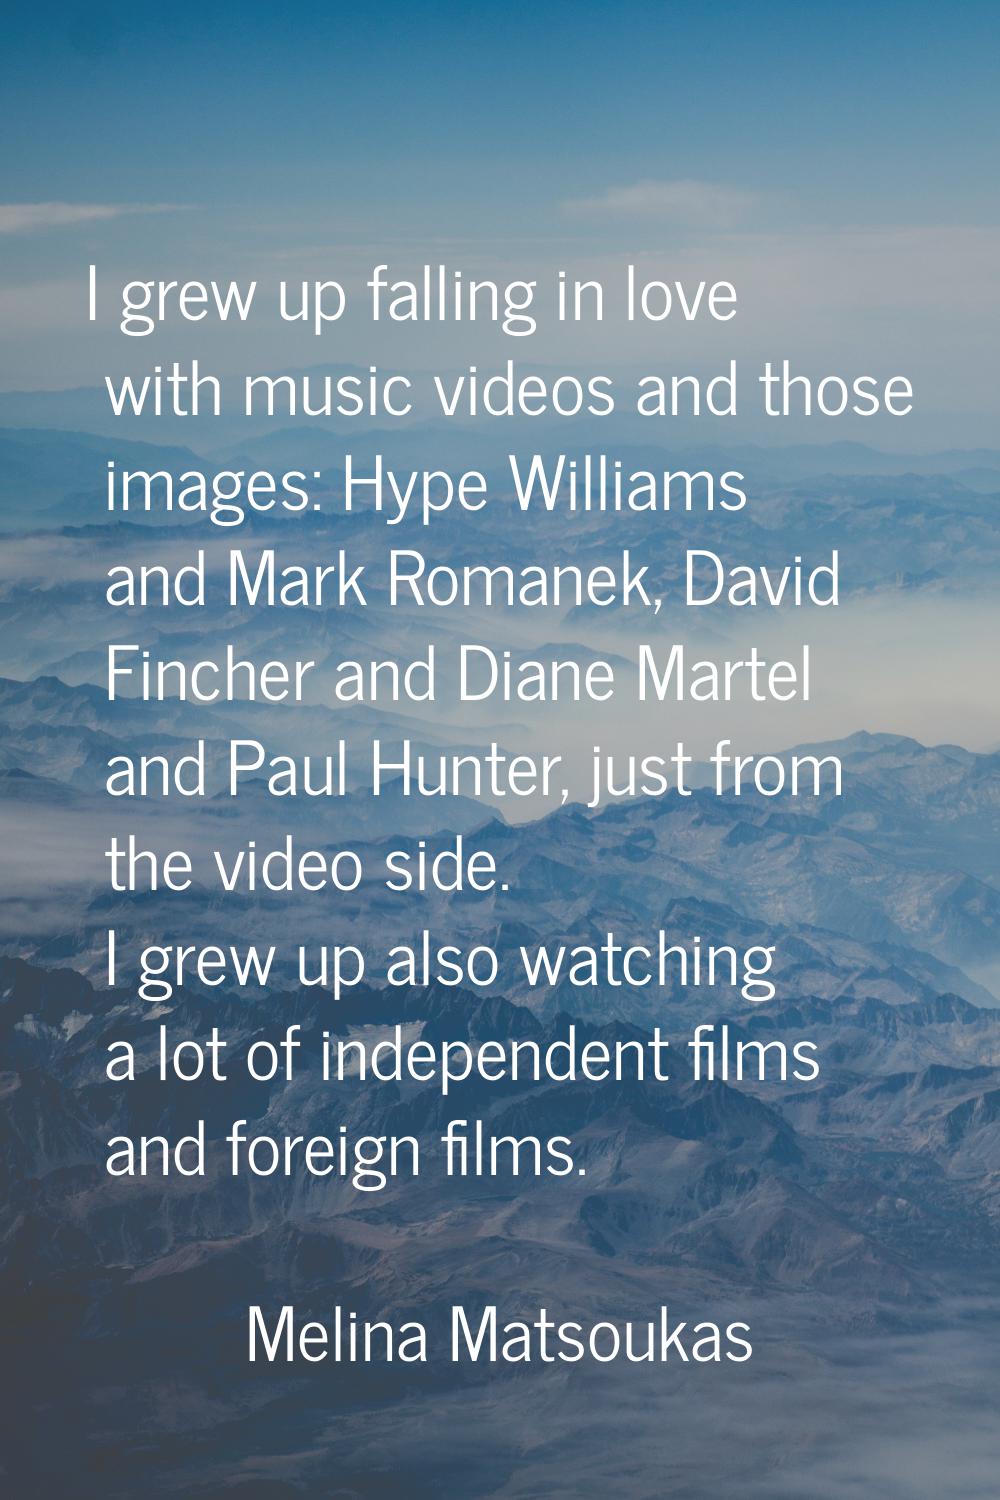 I grew up falling in love with music videos and those images: Hype Williams and Mark Romanek, David